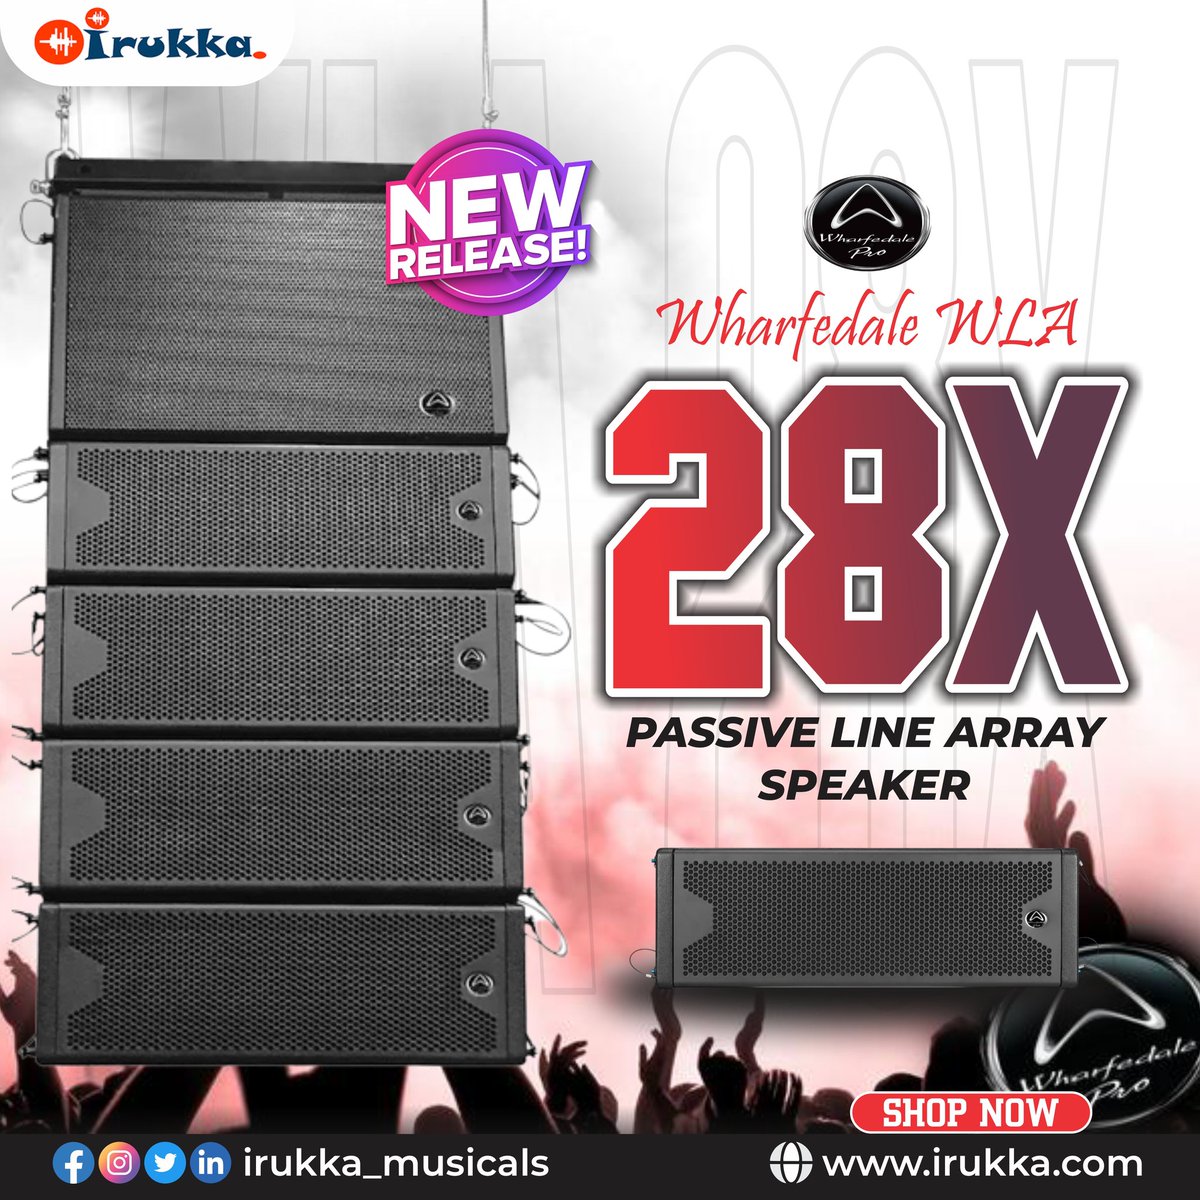 Do you Know?
The #WLA28X line array system is very #versatile and can withstand rough use. 
This makes the system excellent both for #rental, #concert touring and permanent #installations. 

Remember, our dms are opened 24/7 to take your inquiries and orders.

#irukka #Linearray